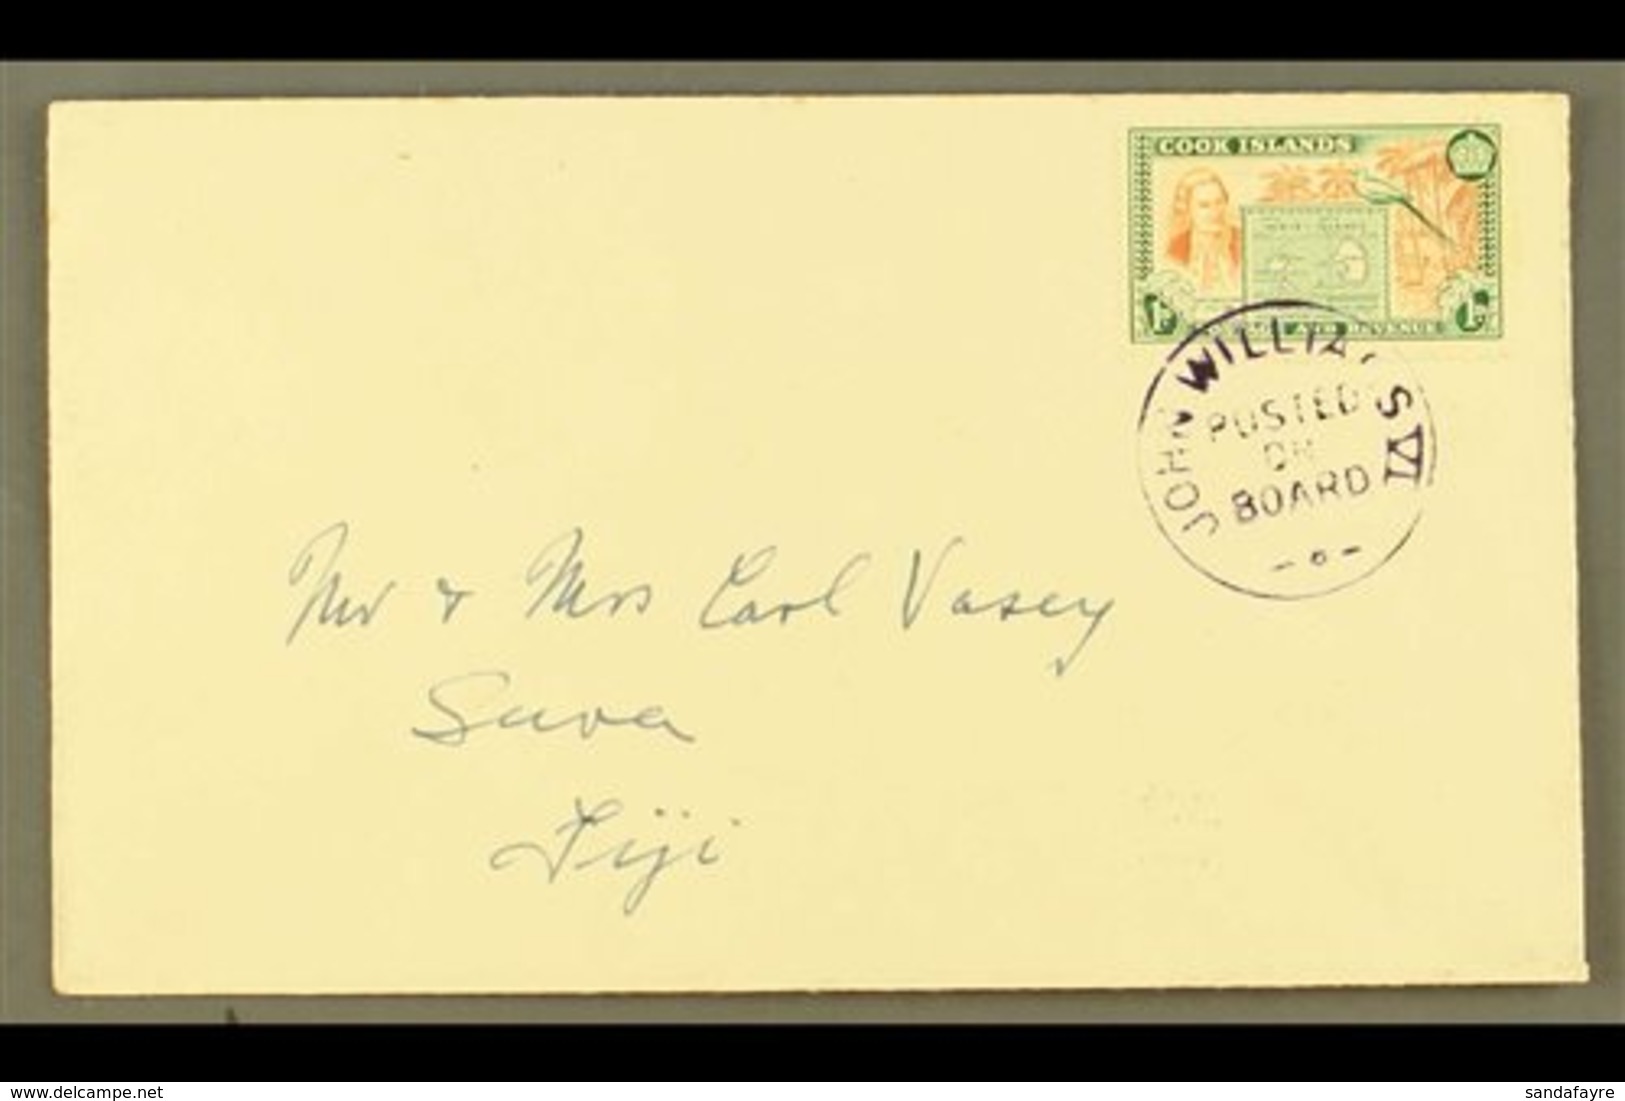 1949 1d Chestnut And Green, SG 151, On A Neat Envelope To Fiji, Tied By Upright Violet "John Williams VI/Posted On Board - Cook